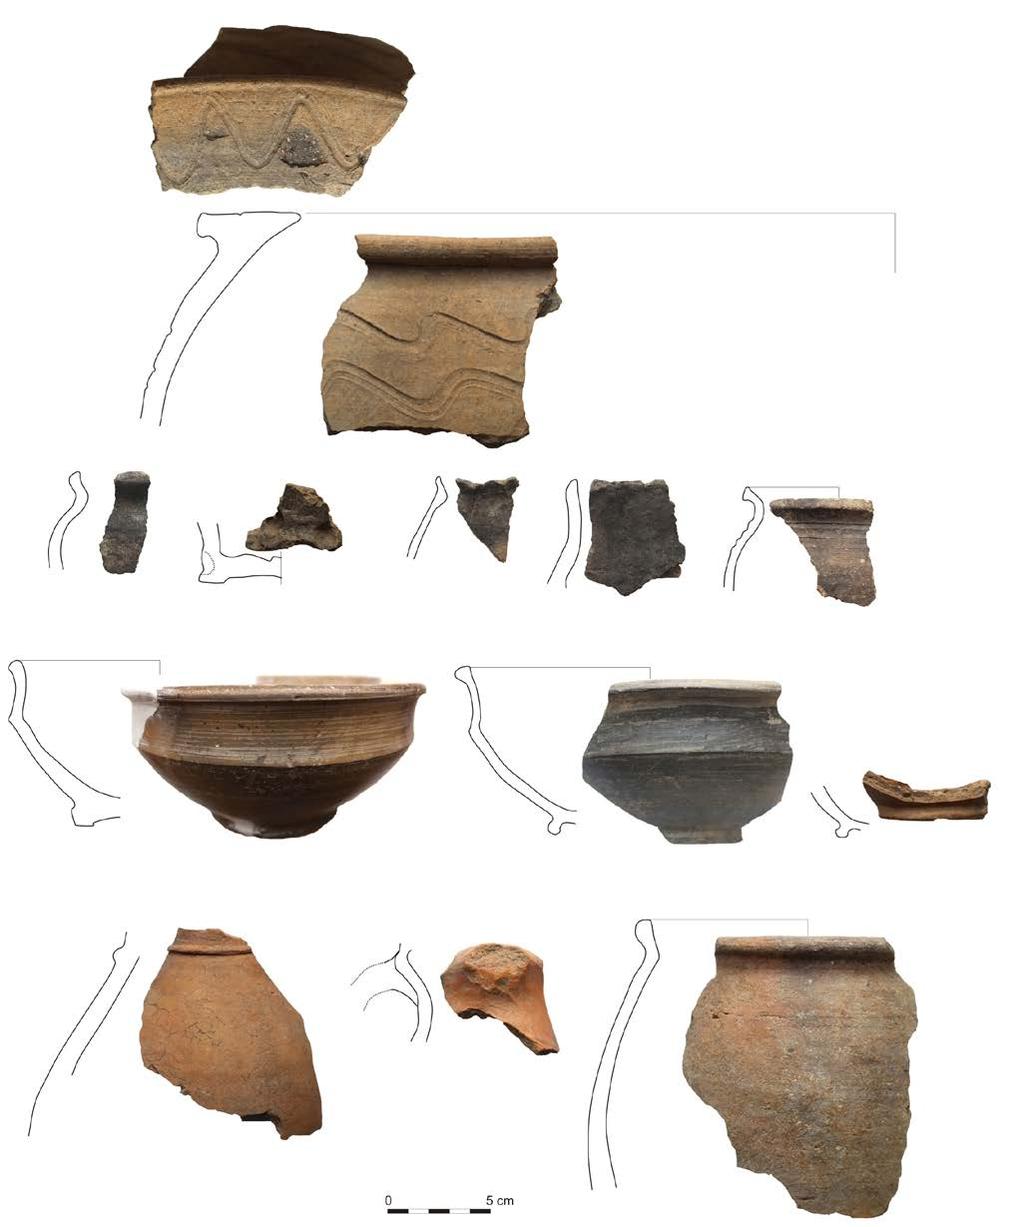 On the basis of the Șumuleu Ciuc excavation, we can establish with certainty that at least two types of houses were in use during this period (Fig. 2).